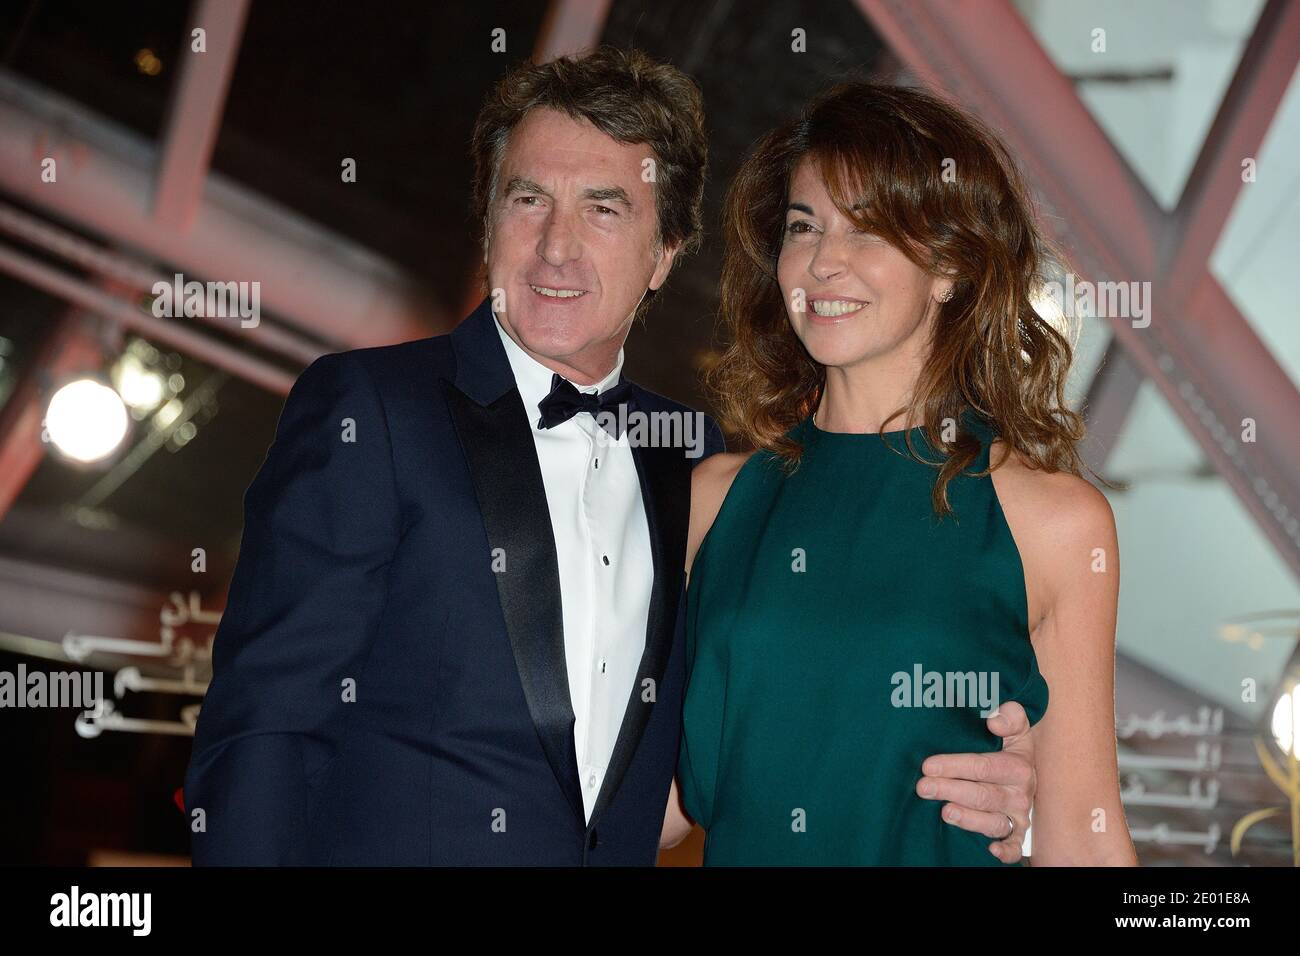 Francois Cluzet and his wife Narjiss attending the 13th Marrakech Film Festival opening ceremony in Marrakech, Morocco on November 29, 2013. Photo by Nicolas Briquet/ABACAPRESS.COM Stock Photo